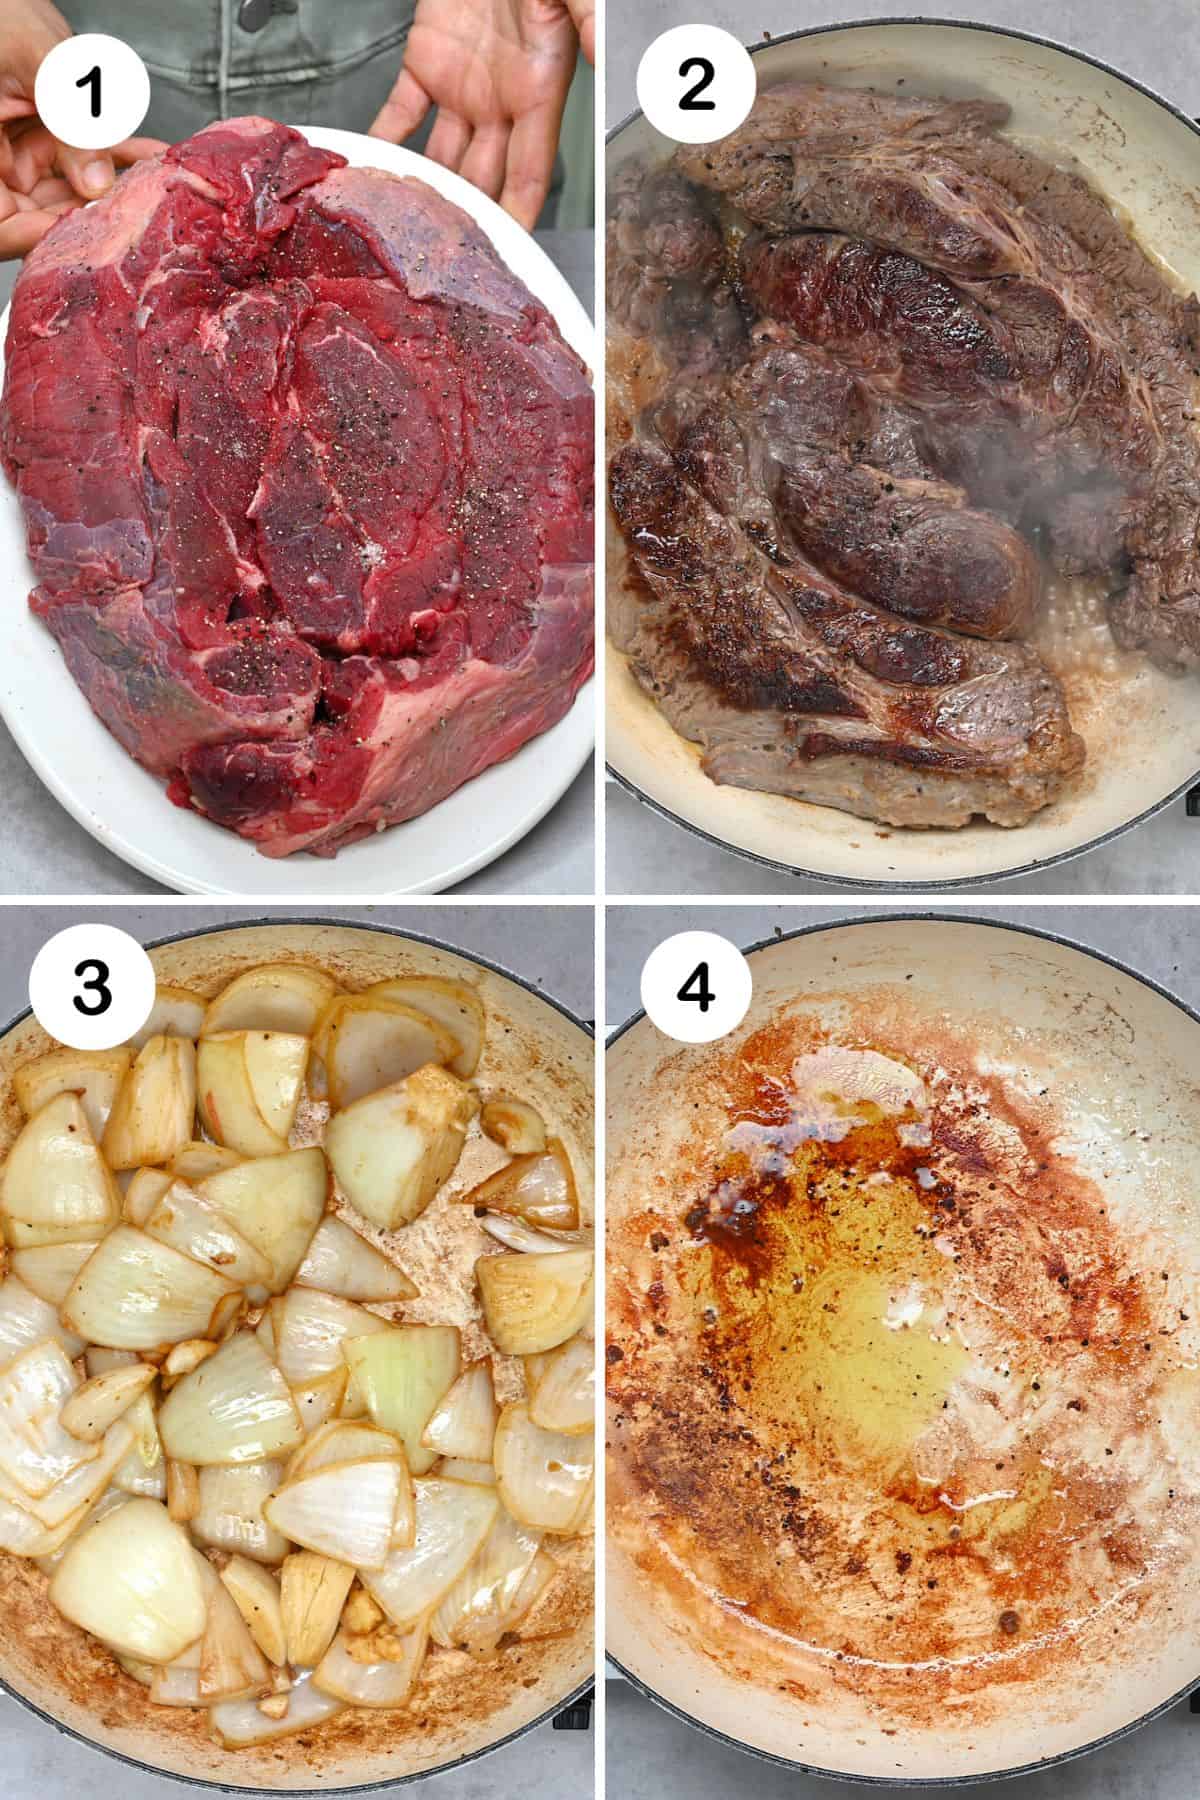 Steps for searing chuck roast and onions